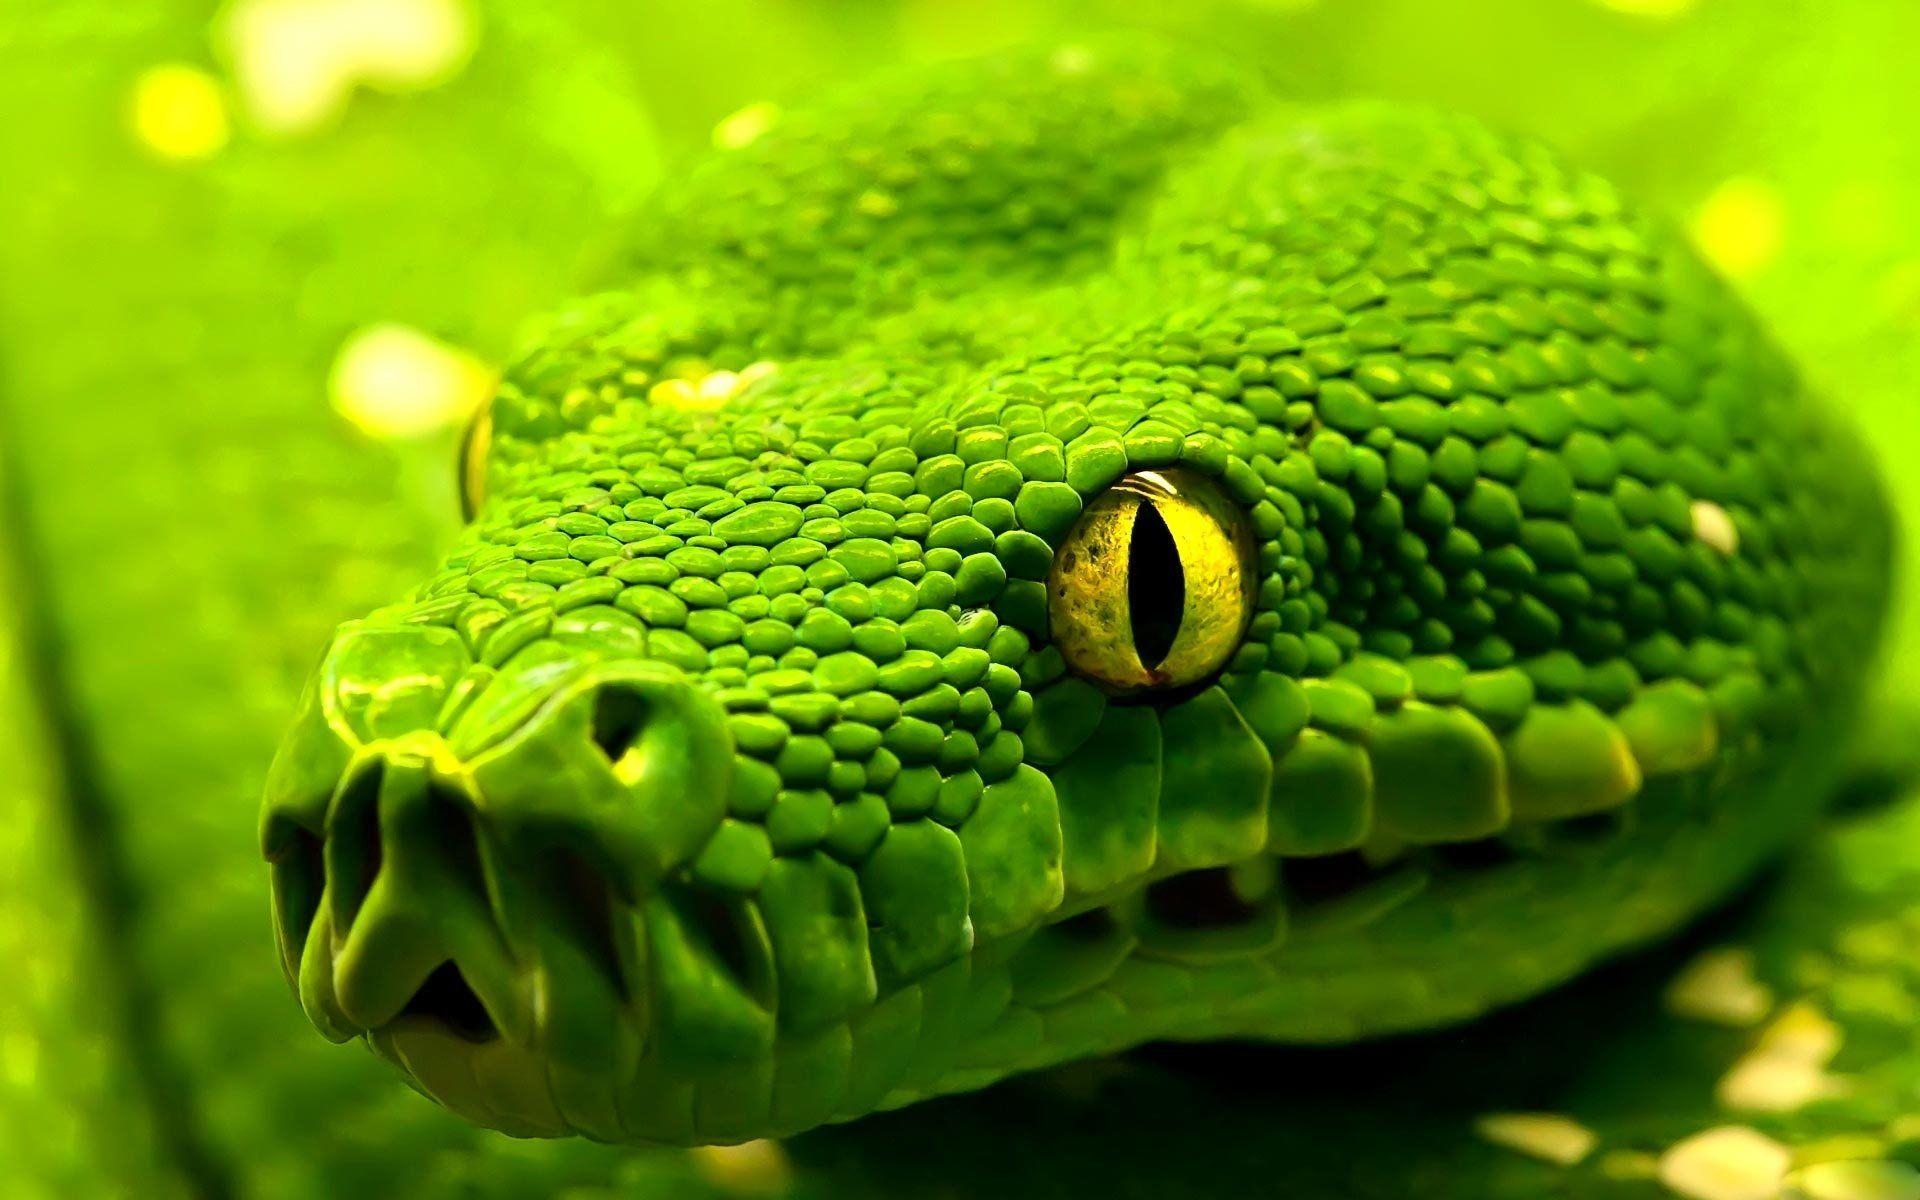 Reptile Wallpaper 70 pictures